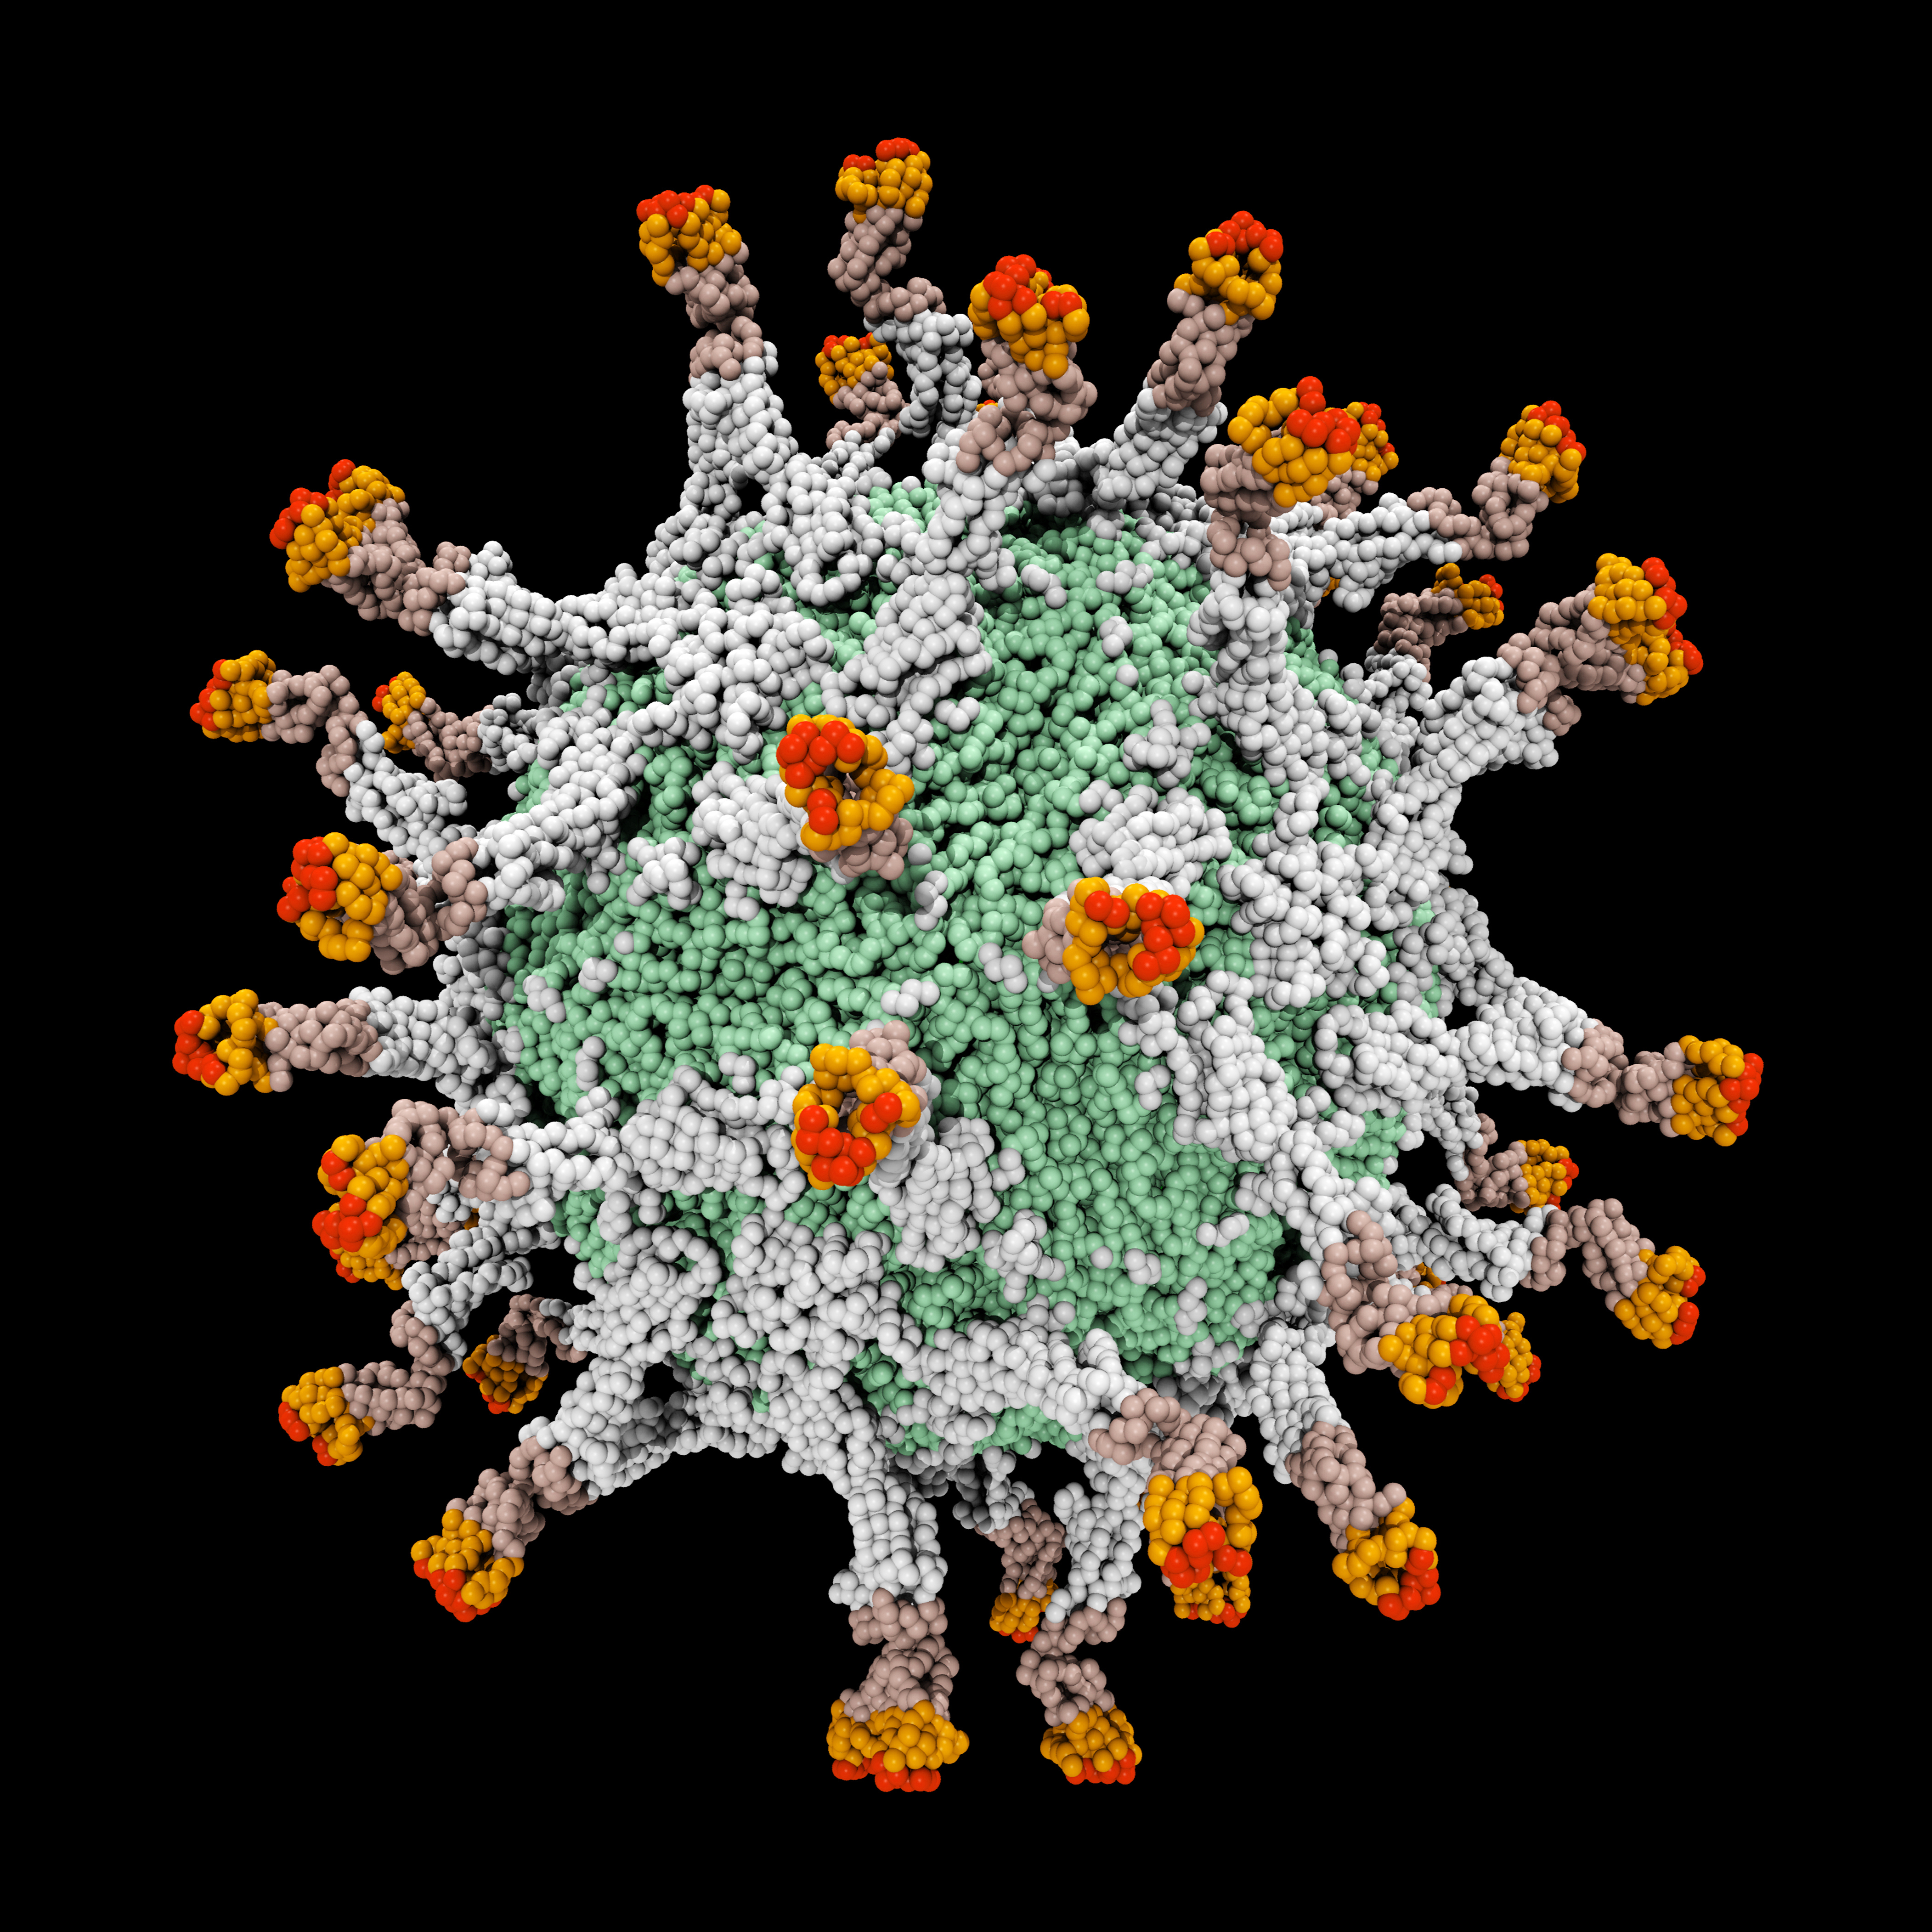 Goodbye to all that: Computer-generated model of a poliovirus